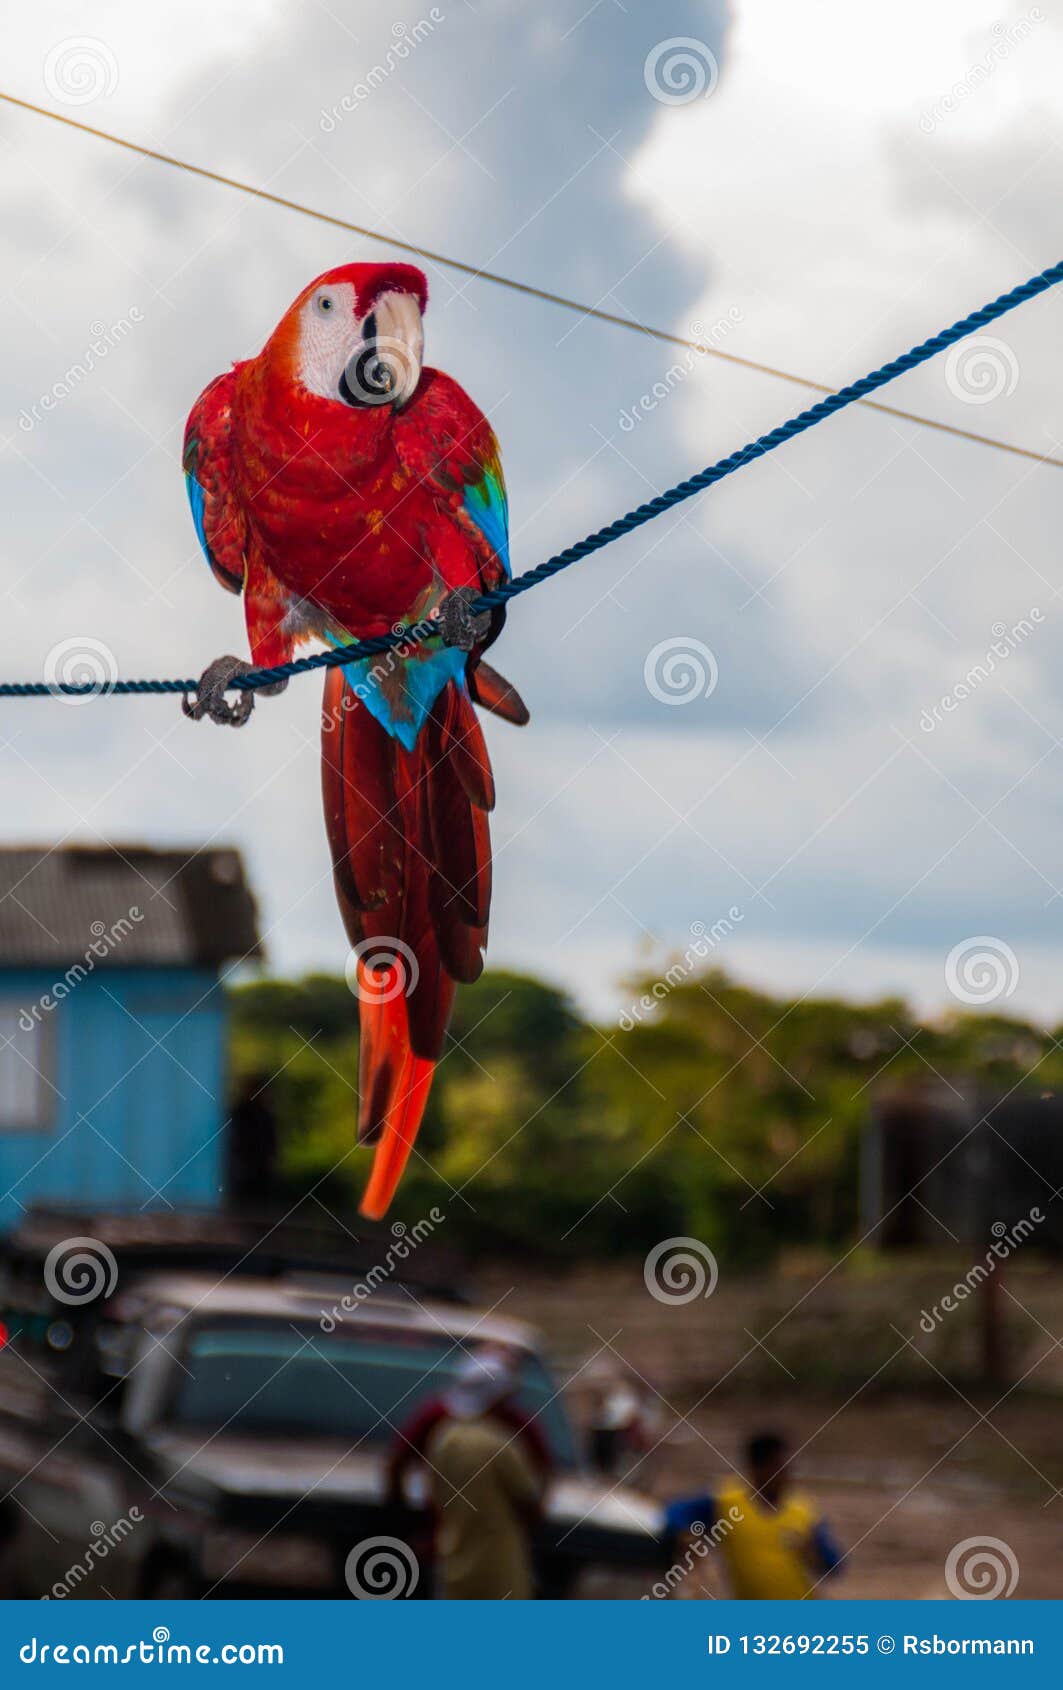 Scarlet Macaw In Amazon Stock Image Image Of Central